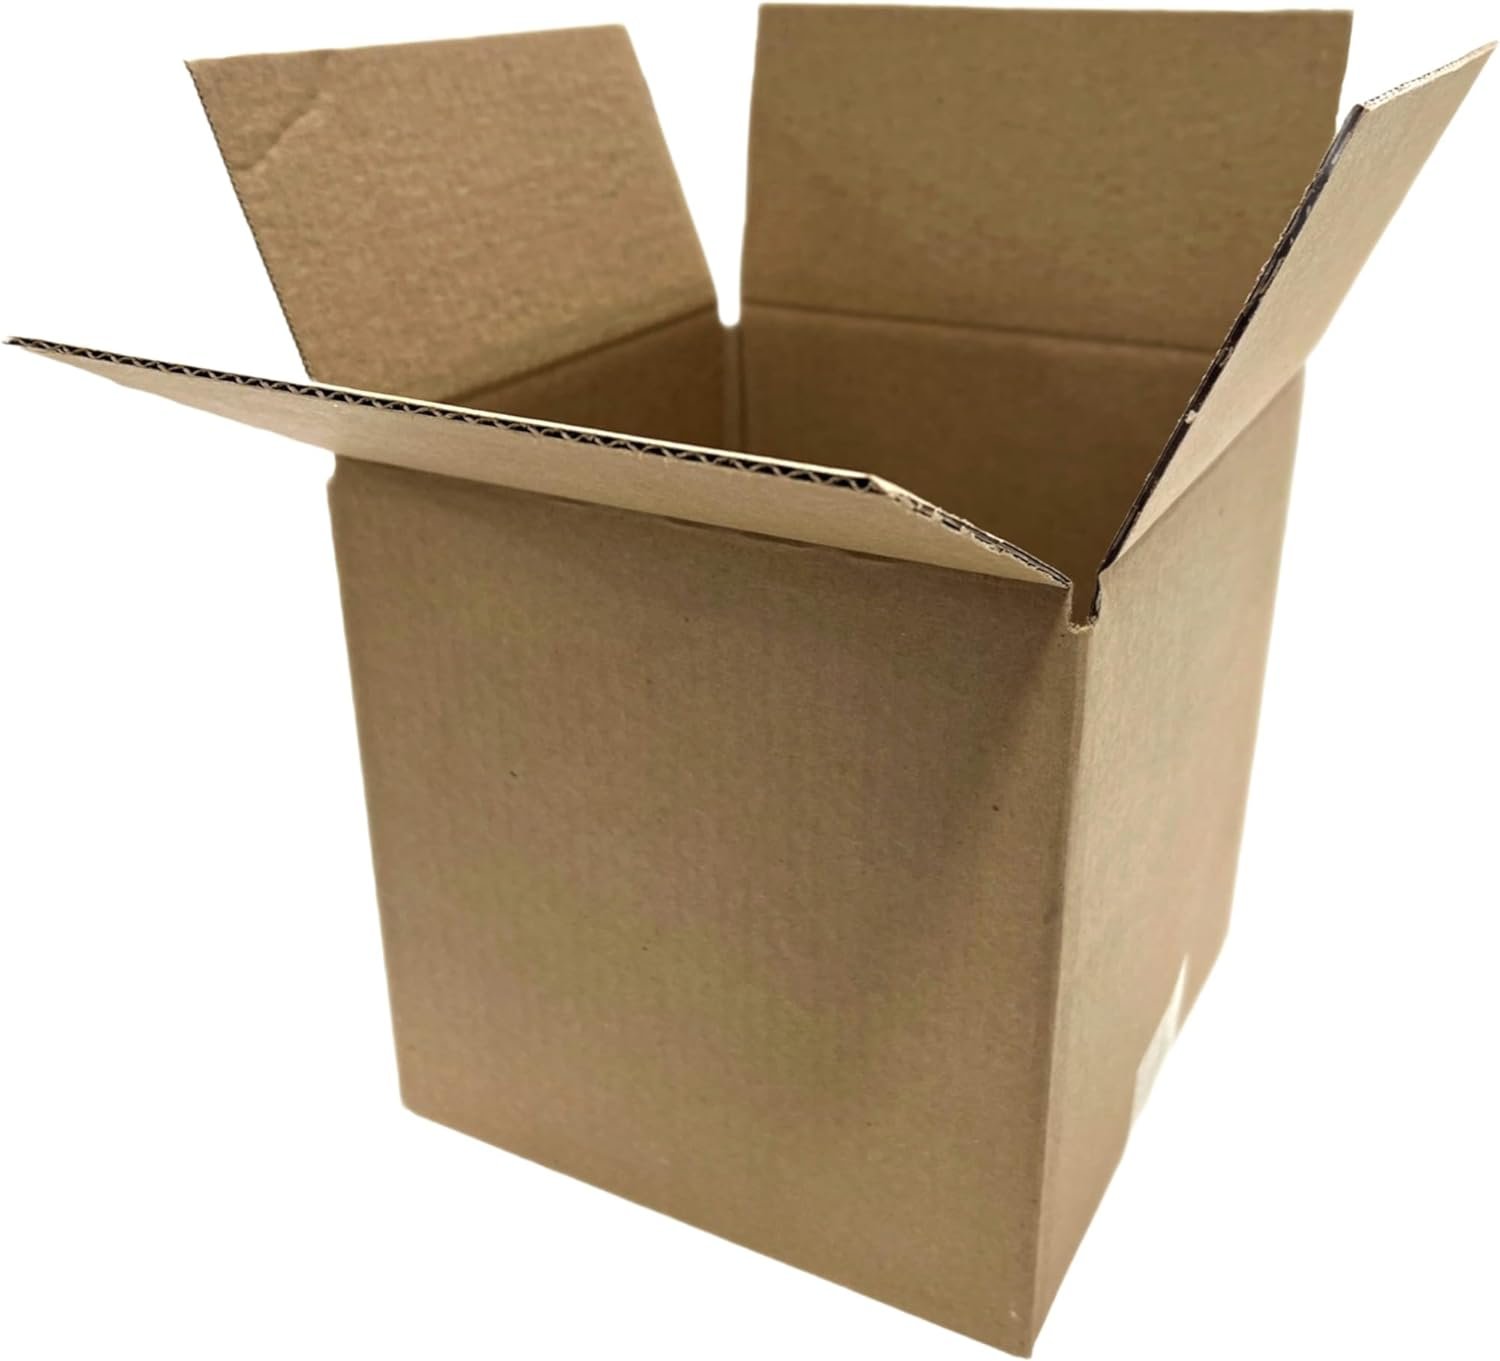 25 5x5x5 Cardboard Paper Boxes Mailing Packing Shipping Box Corrugated Carton